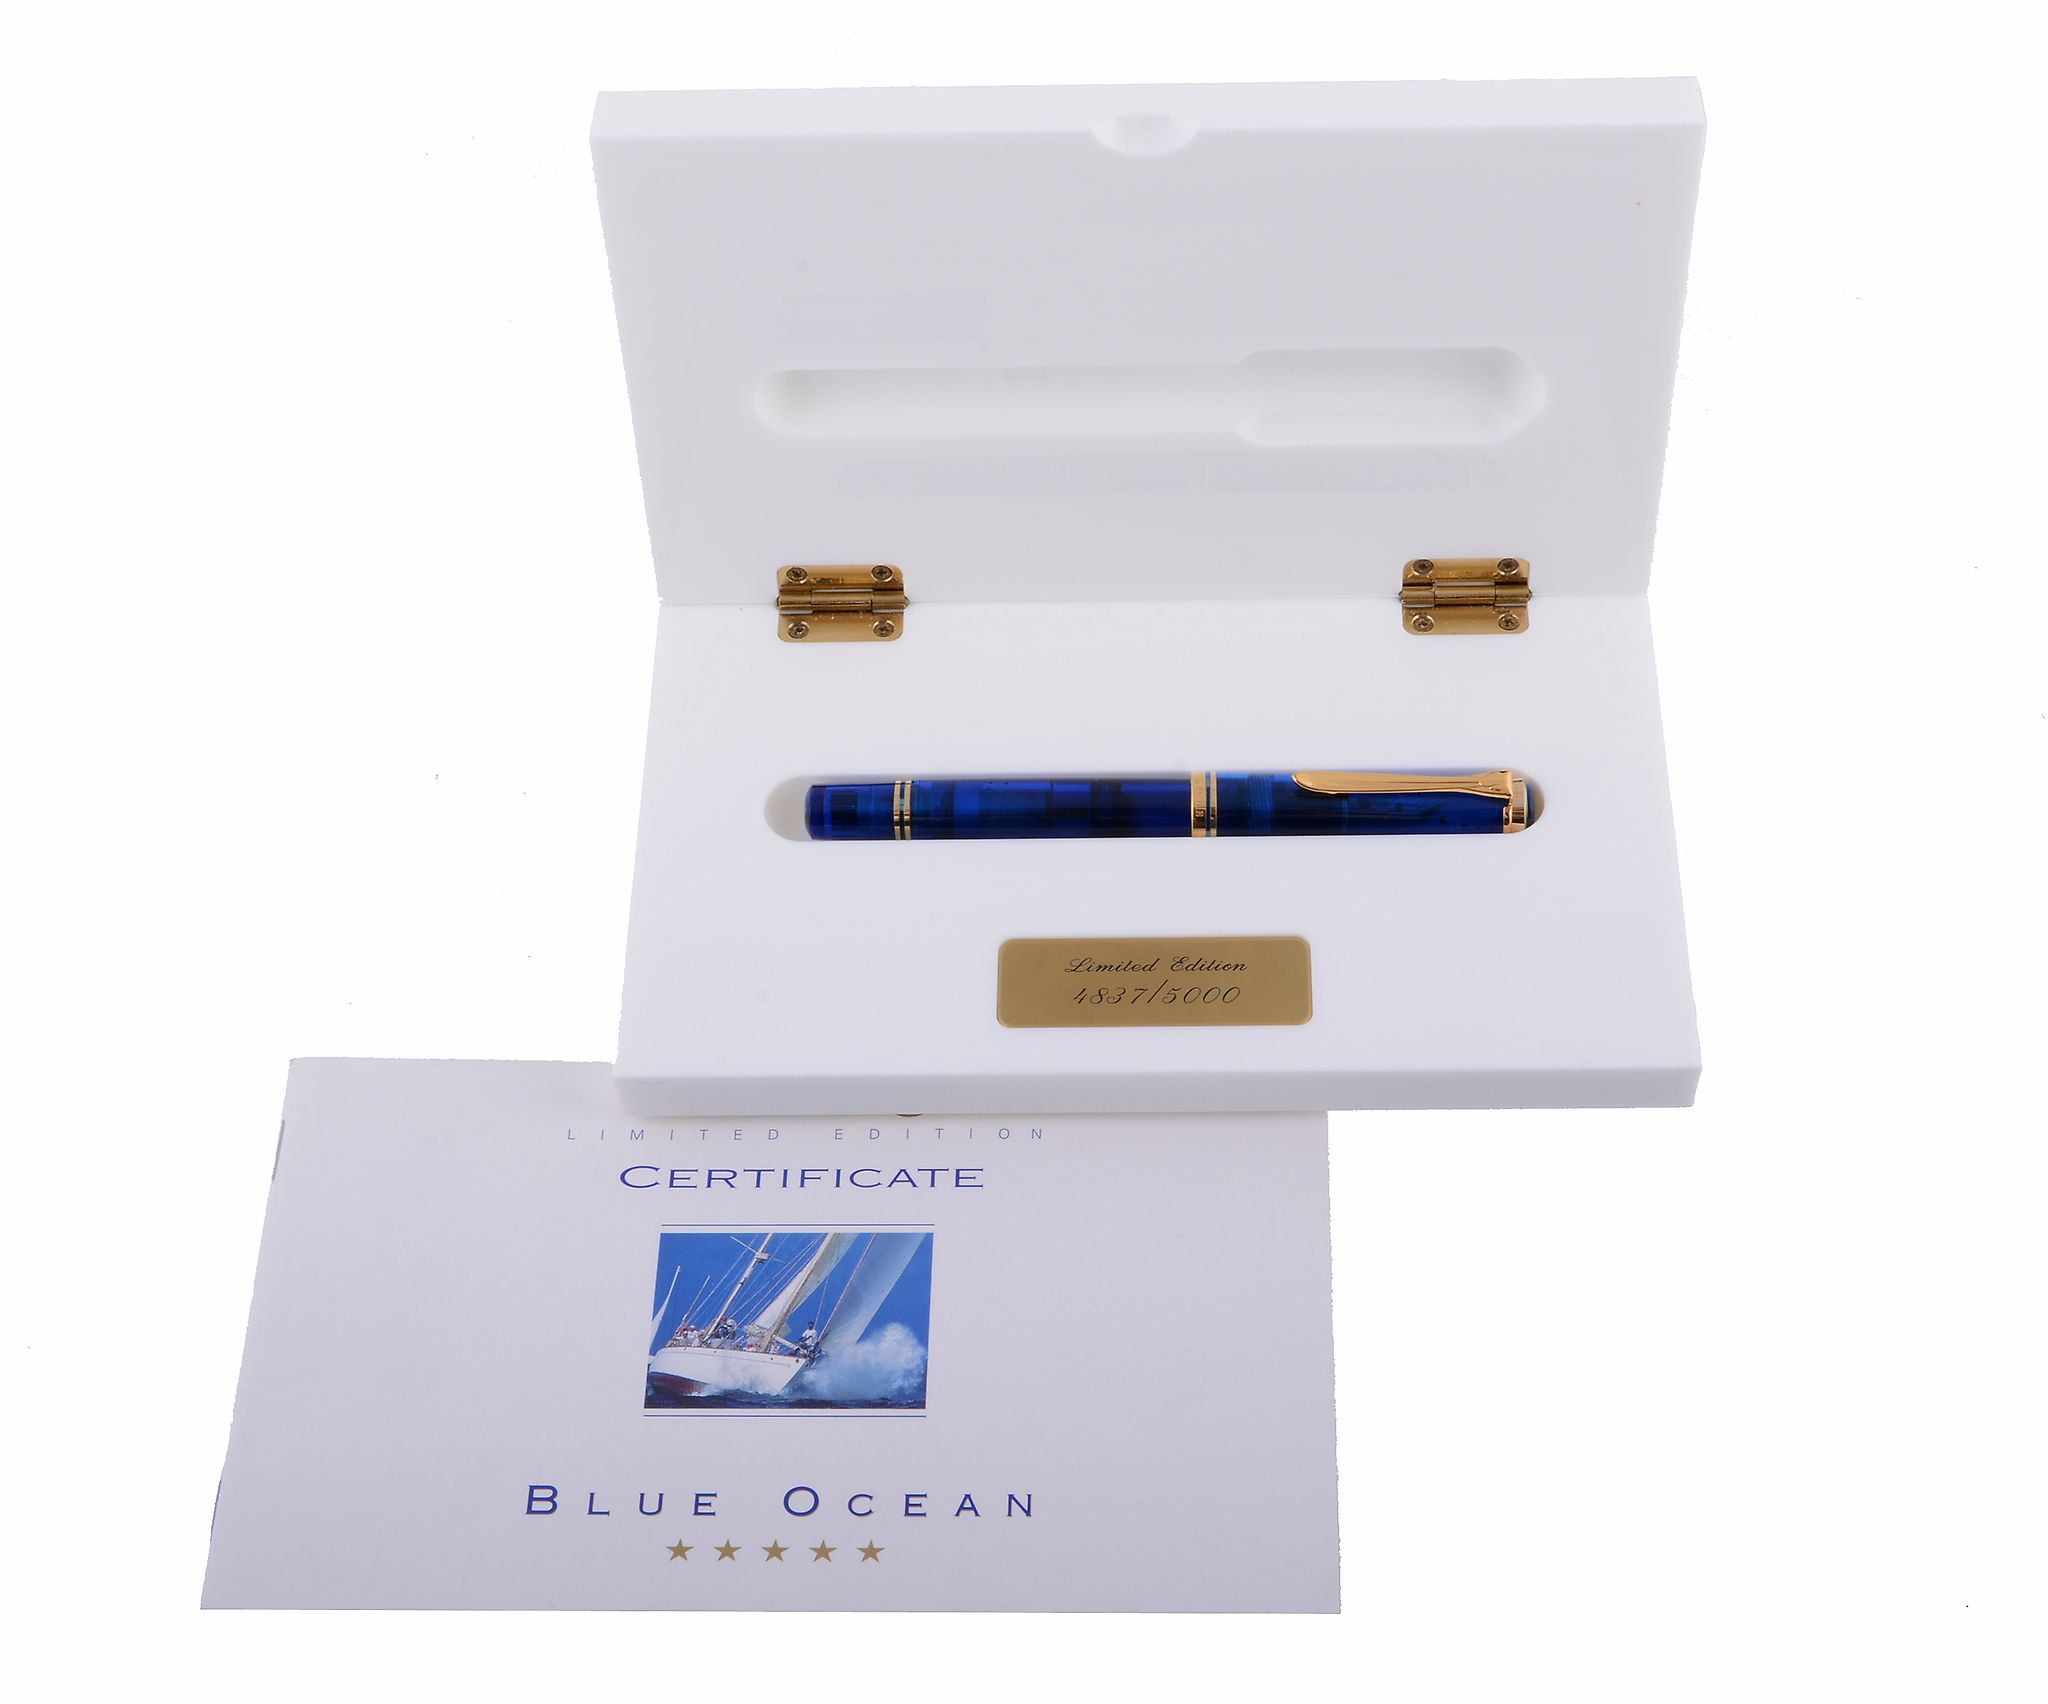 Pelikan, Blue Ocean, a limited edition fountain pen  , no. 4837/5000, with a blue resin cap and